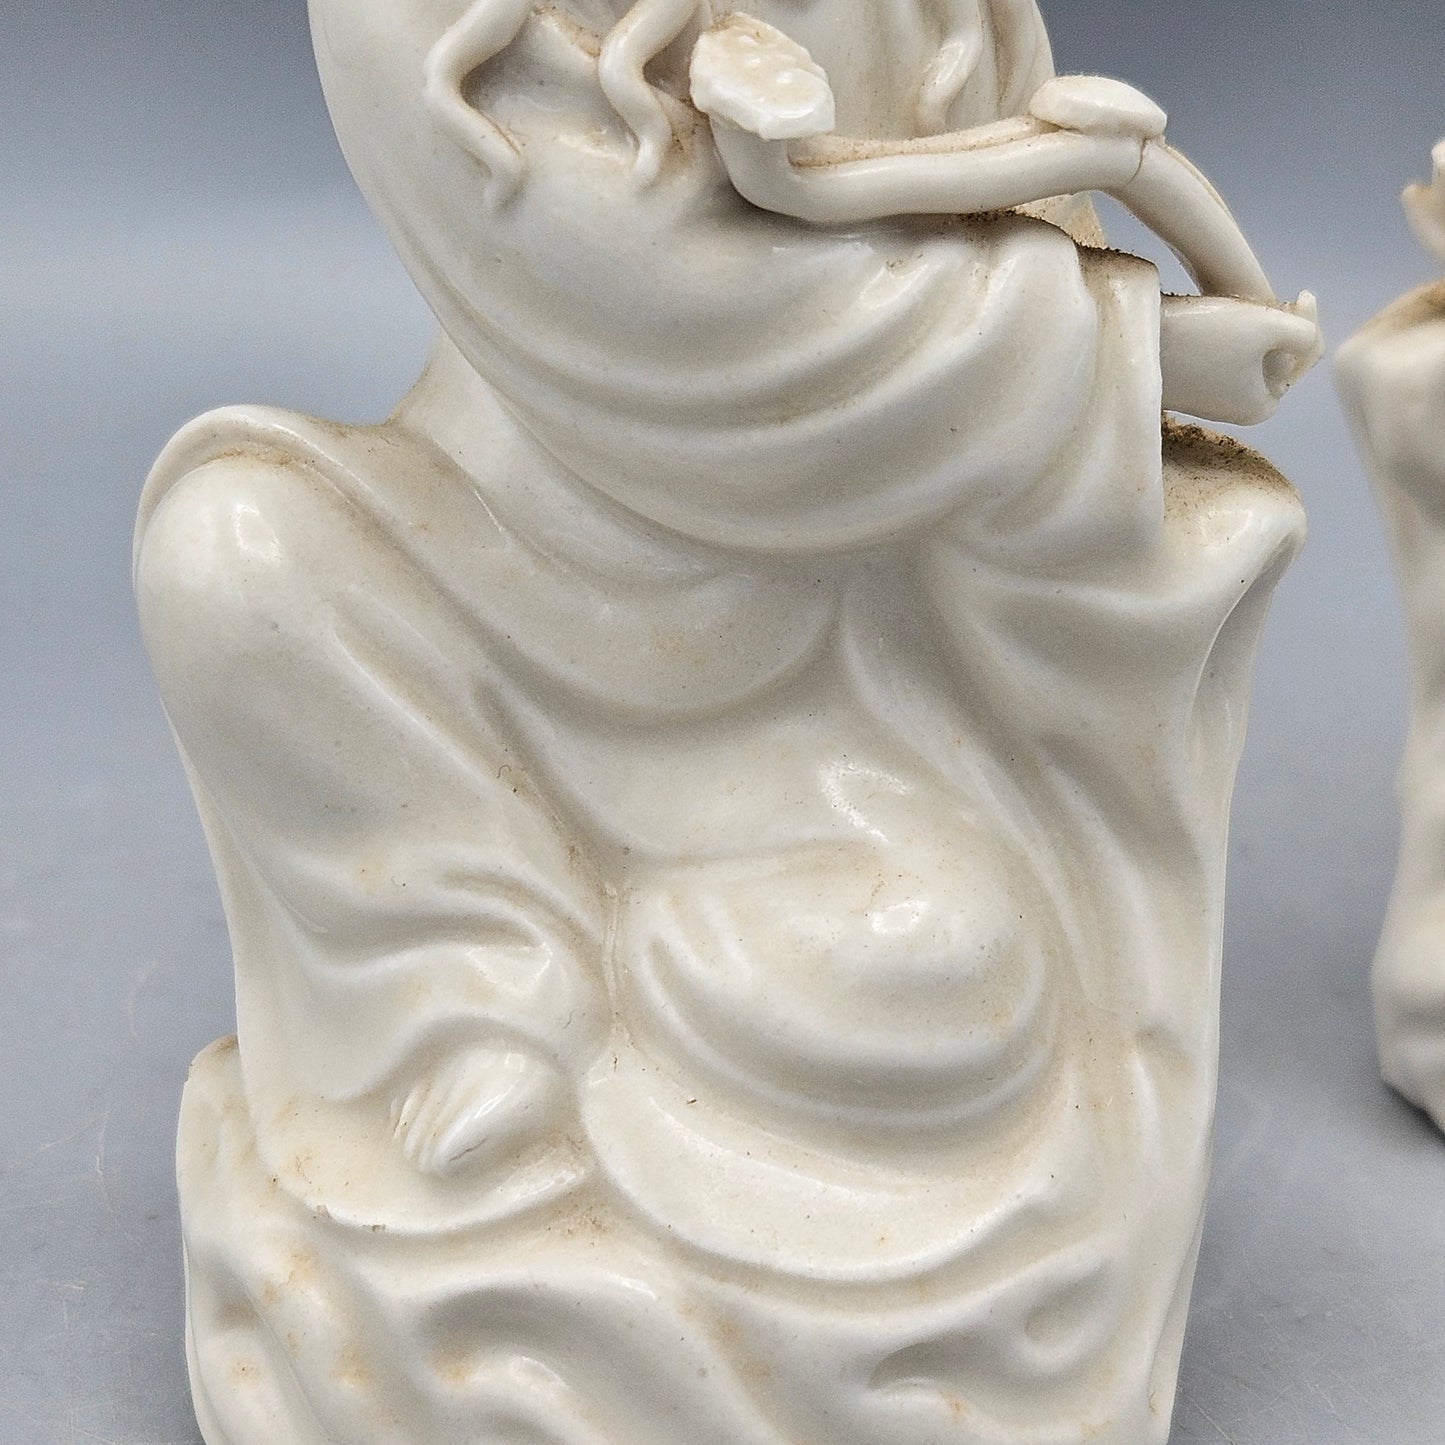 Pair of Vintage Porcelain Chinese Seated Figures